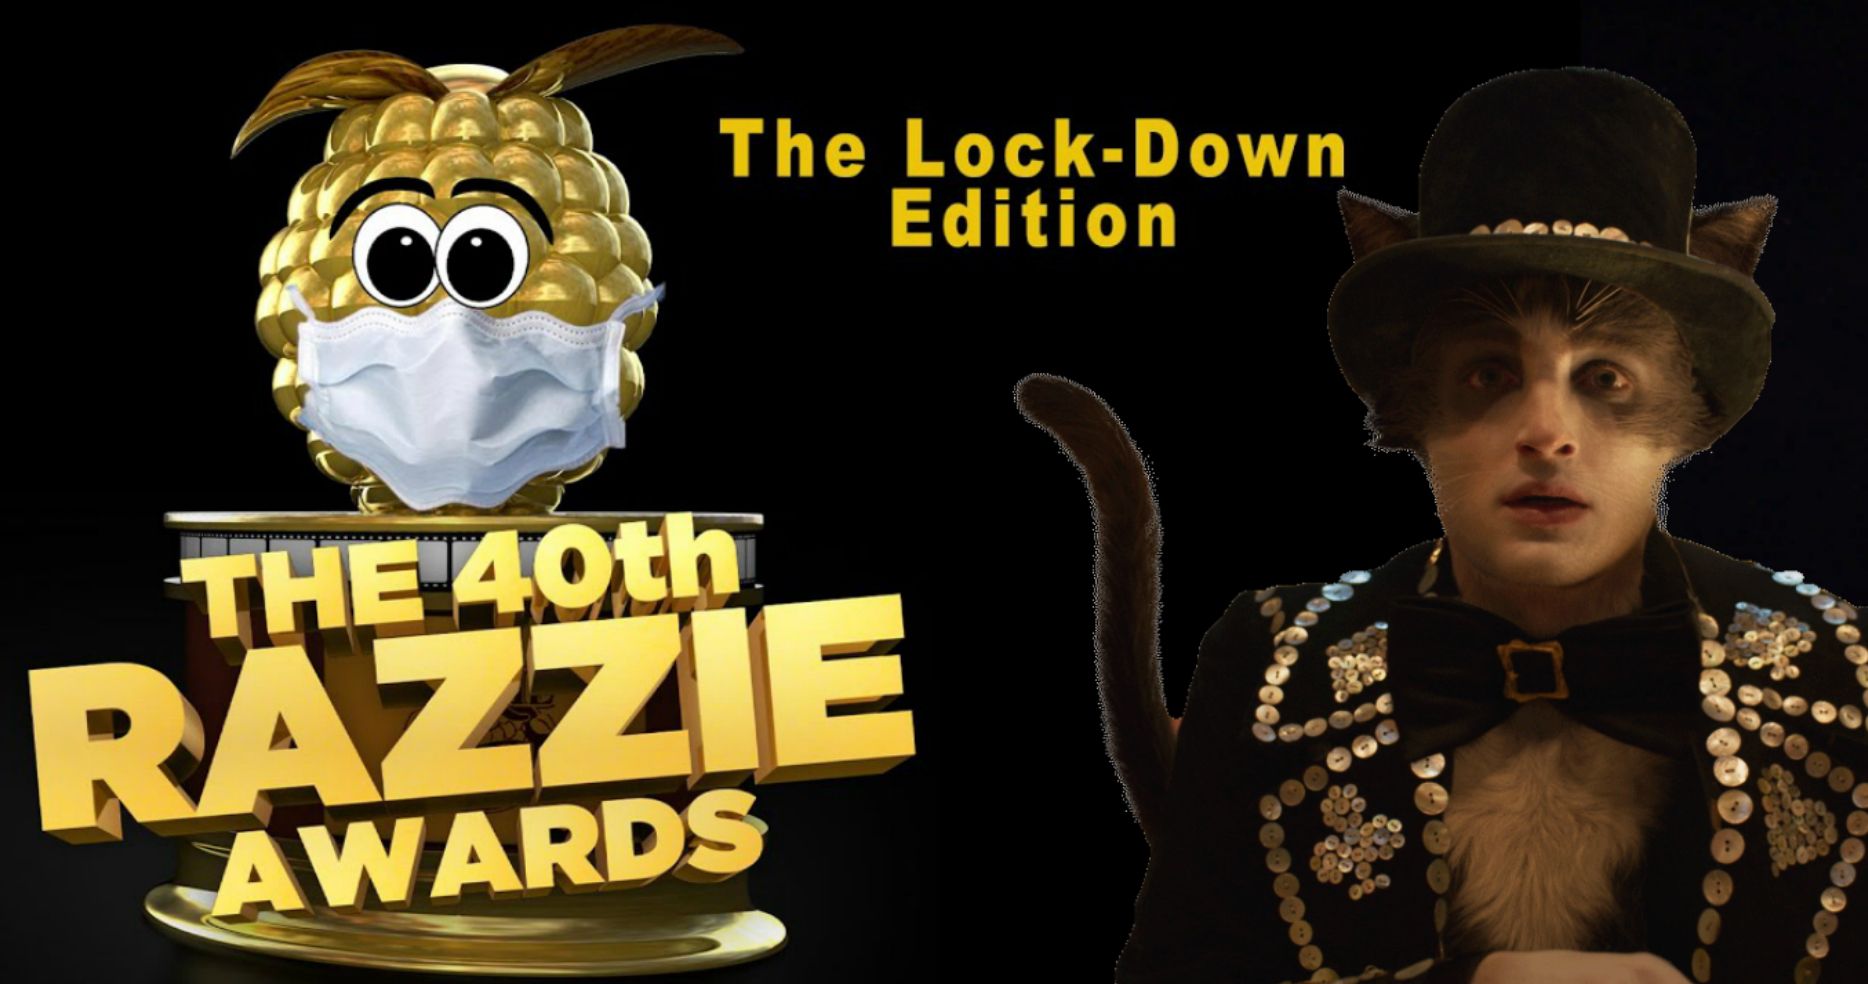 2020 Razzie Awards Winners Announced and Cats Almost Sweeps It All